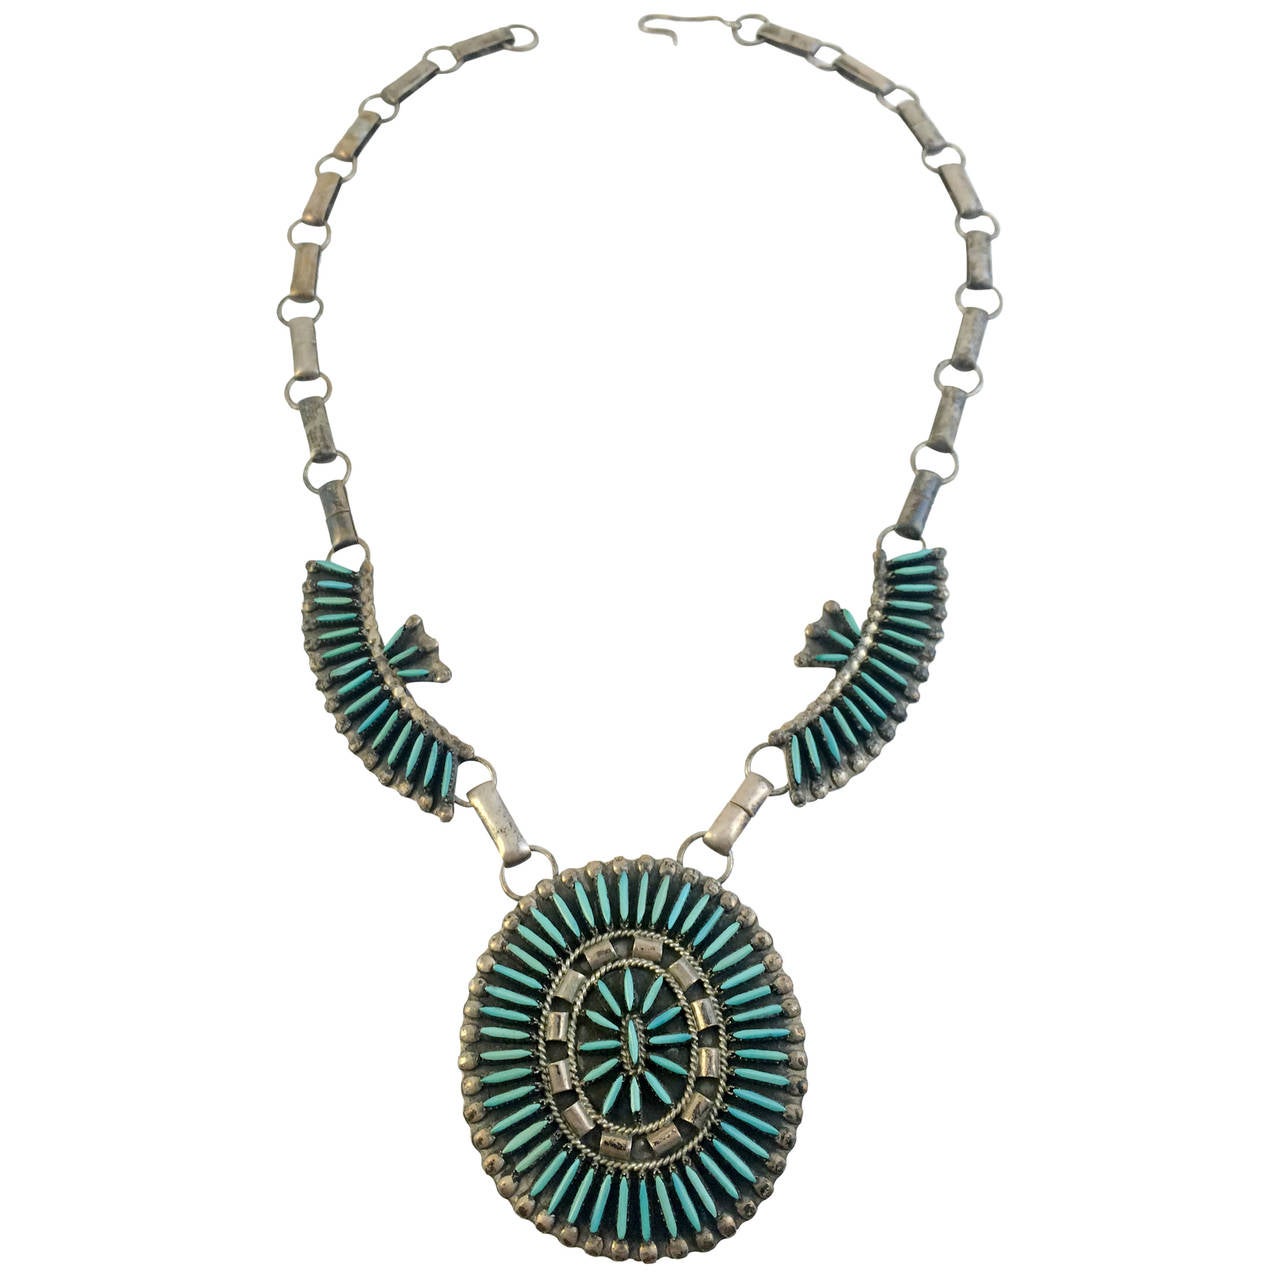 Native American Silver and Turquoise Necklace - 1970s